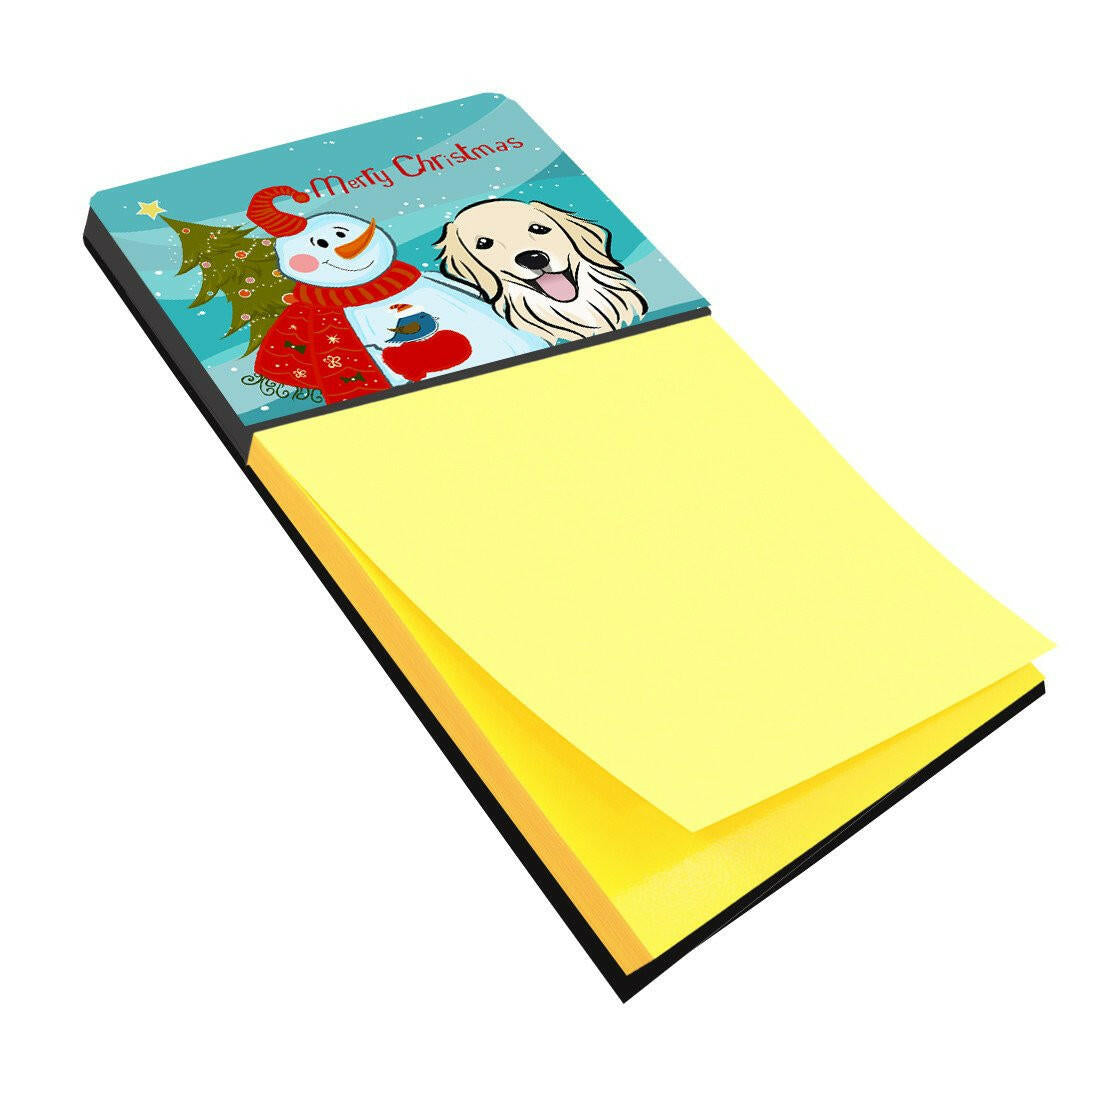 Snowman with Golden Retriever Sticky Note Holder BB1825SN by Caroline's Treasures